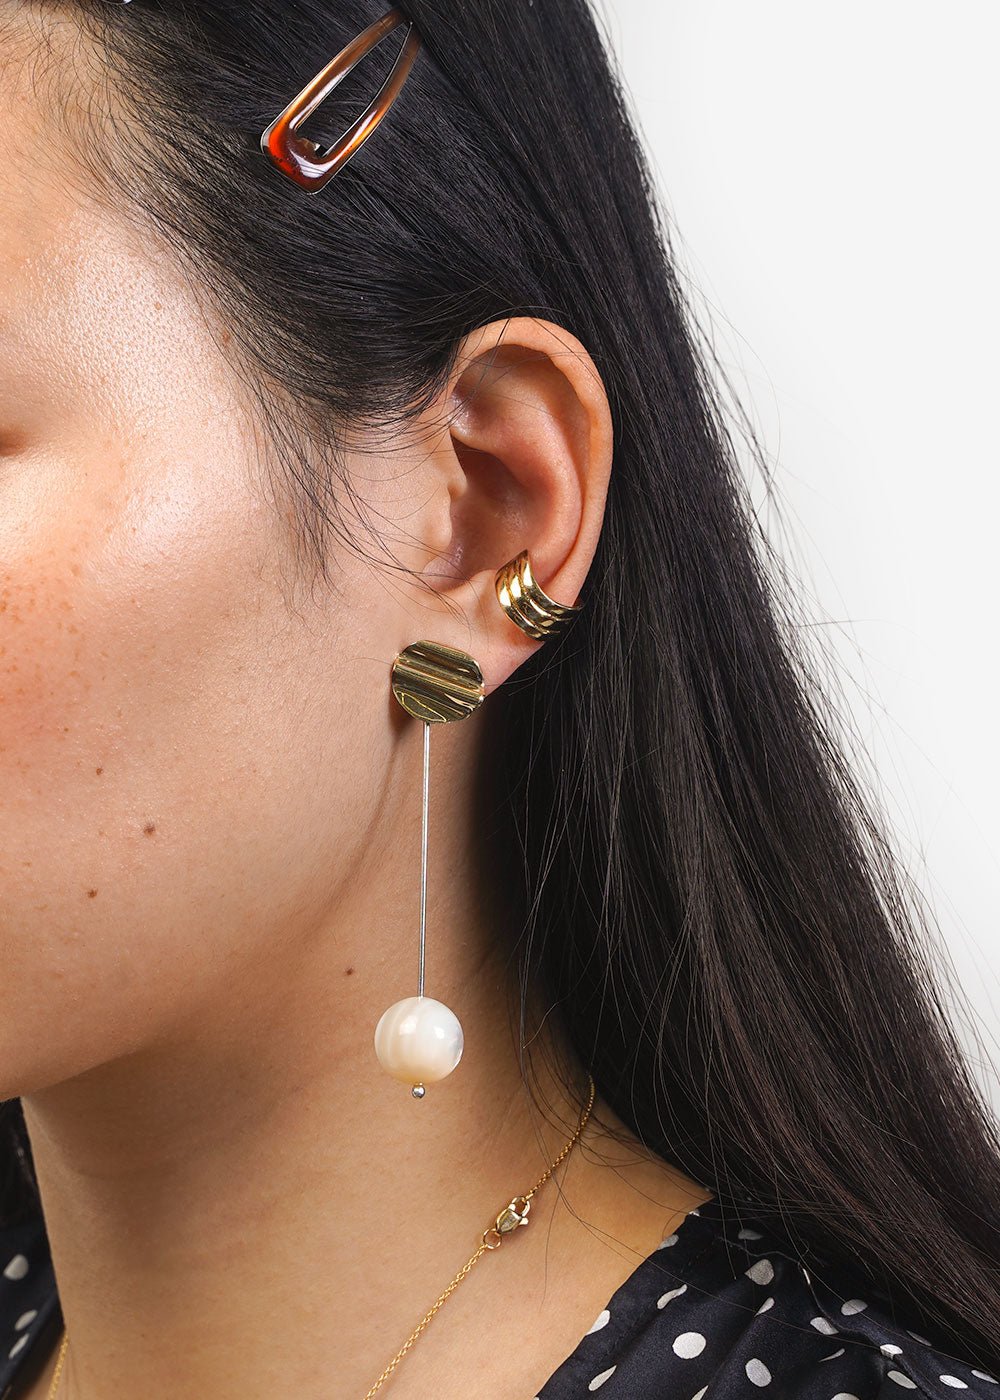 LUINY Luna Perla Drop Earrings — Shop sustainable fashion and slow fashion at New Classics Studios